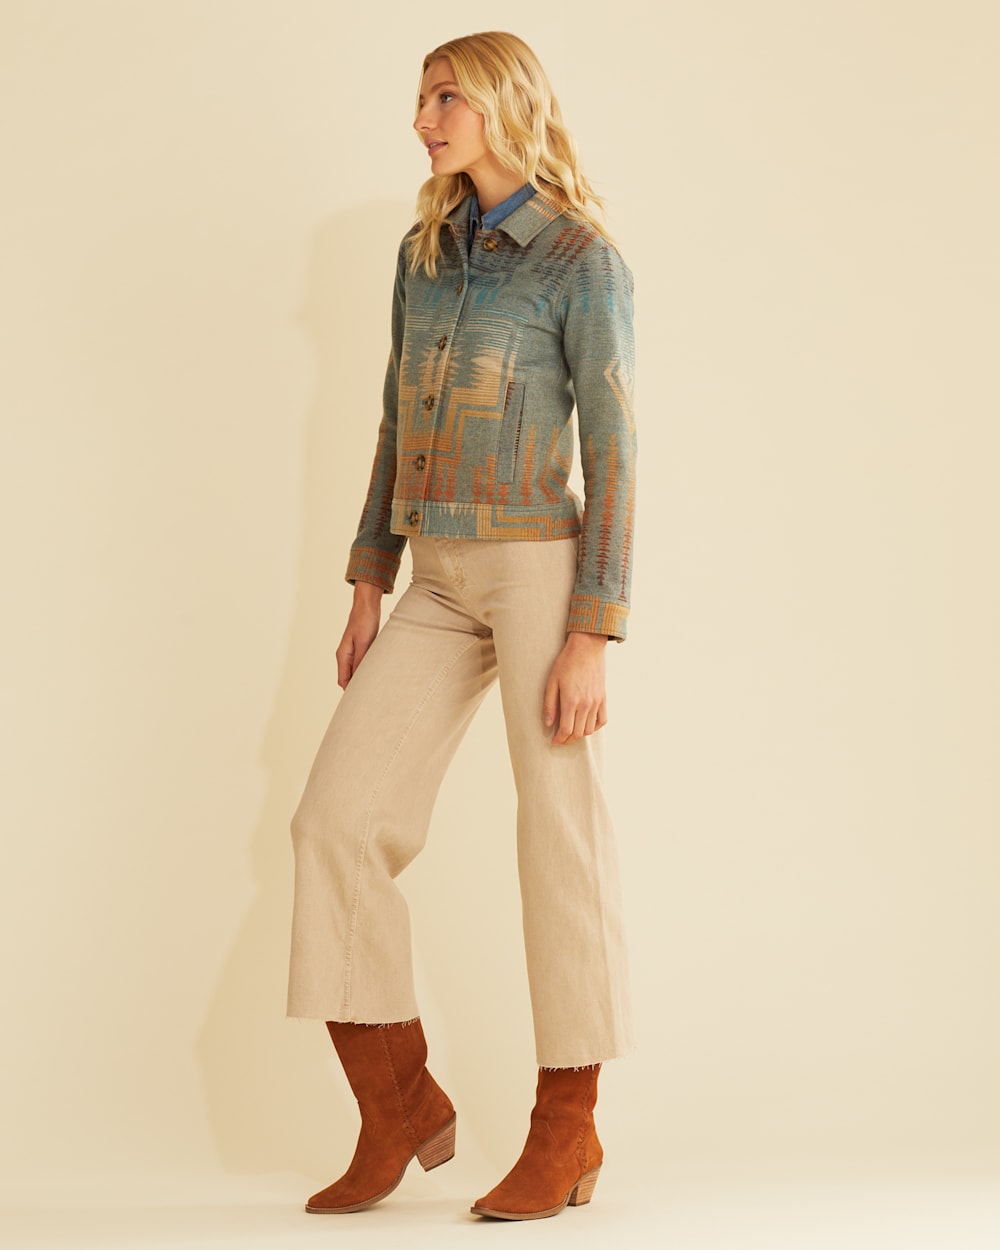 ALTERNATE VIEW OF WOMEN'S WOOL WILLA JACKET IN SHALE MIX HARDING image number 2